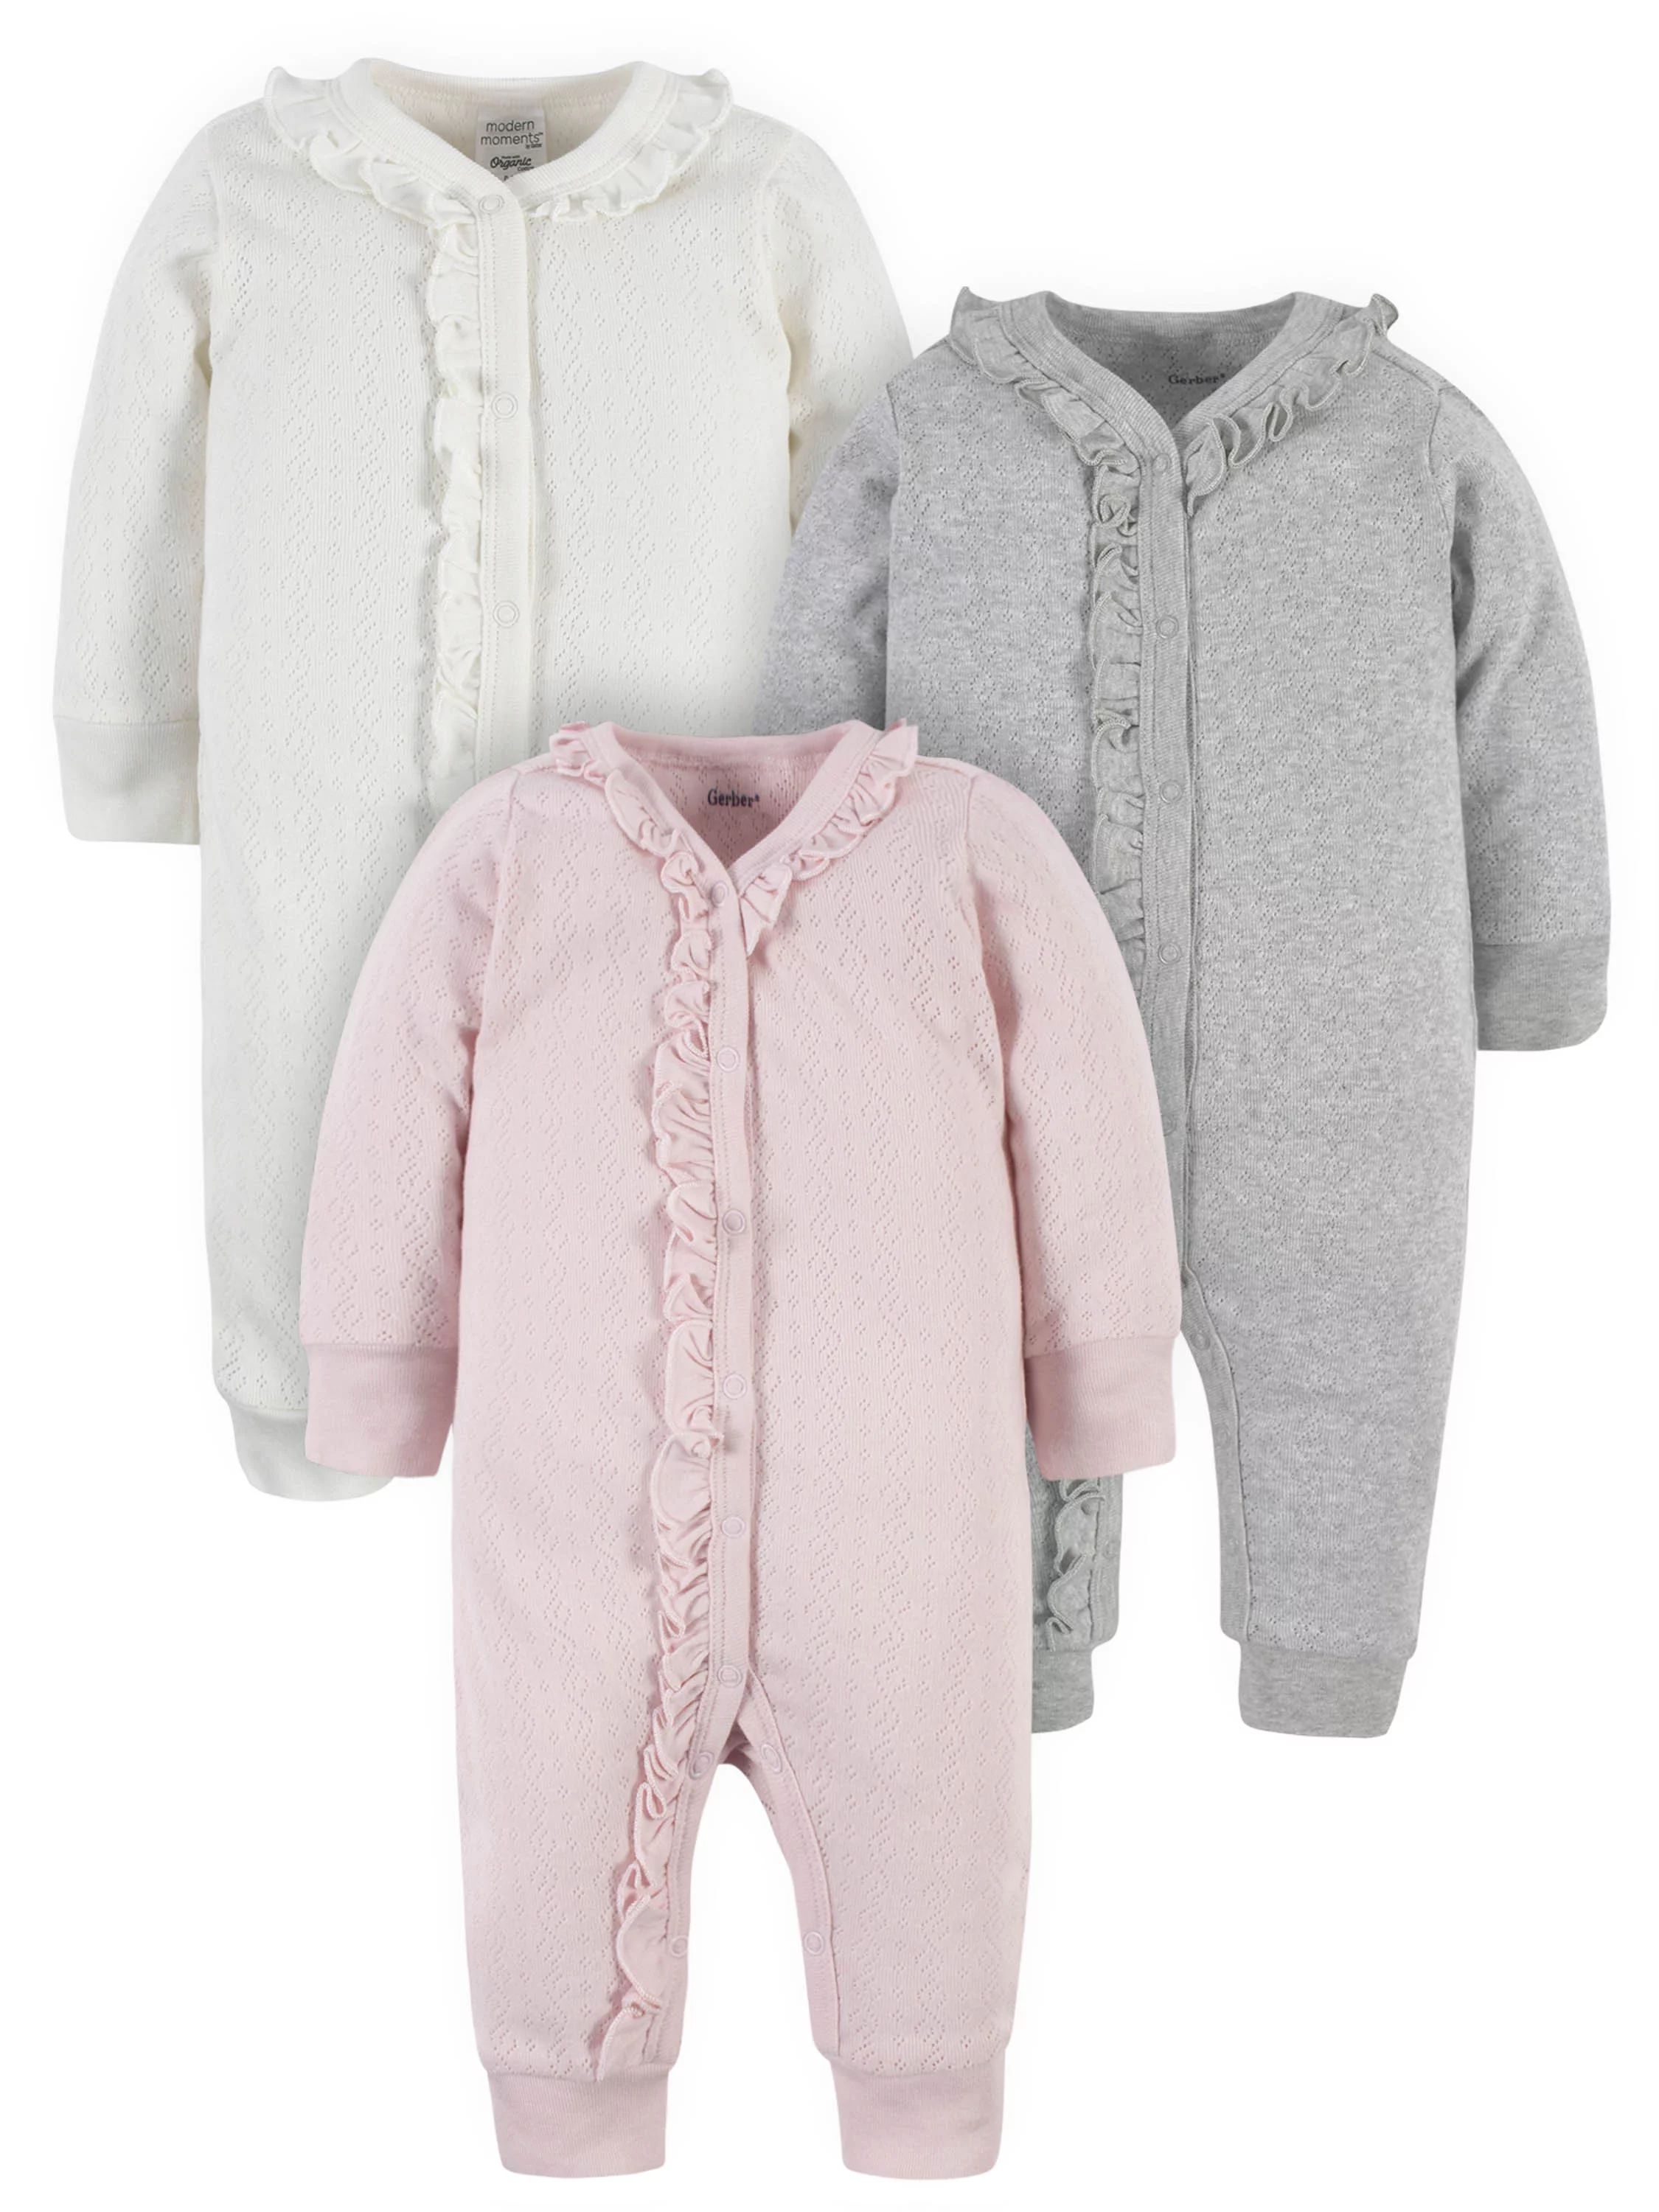 Modern Moments by Gerber Baby Girl Solid Pointelle Coveralls, 3-Pack, Newborn-12 Months | Walmart (US)